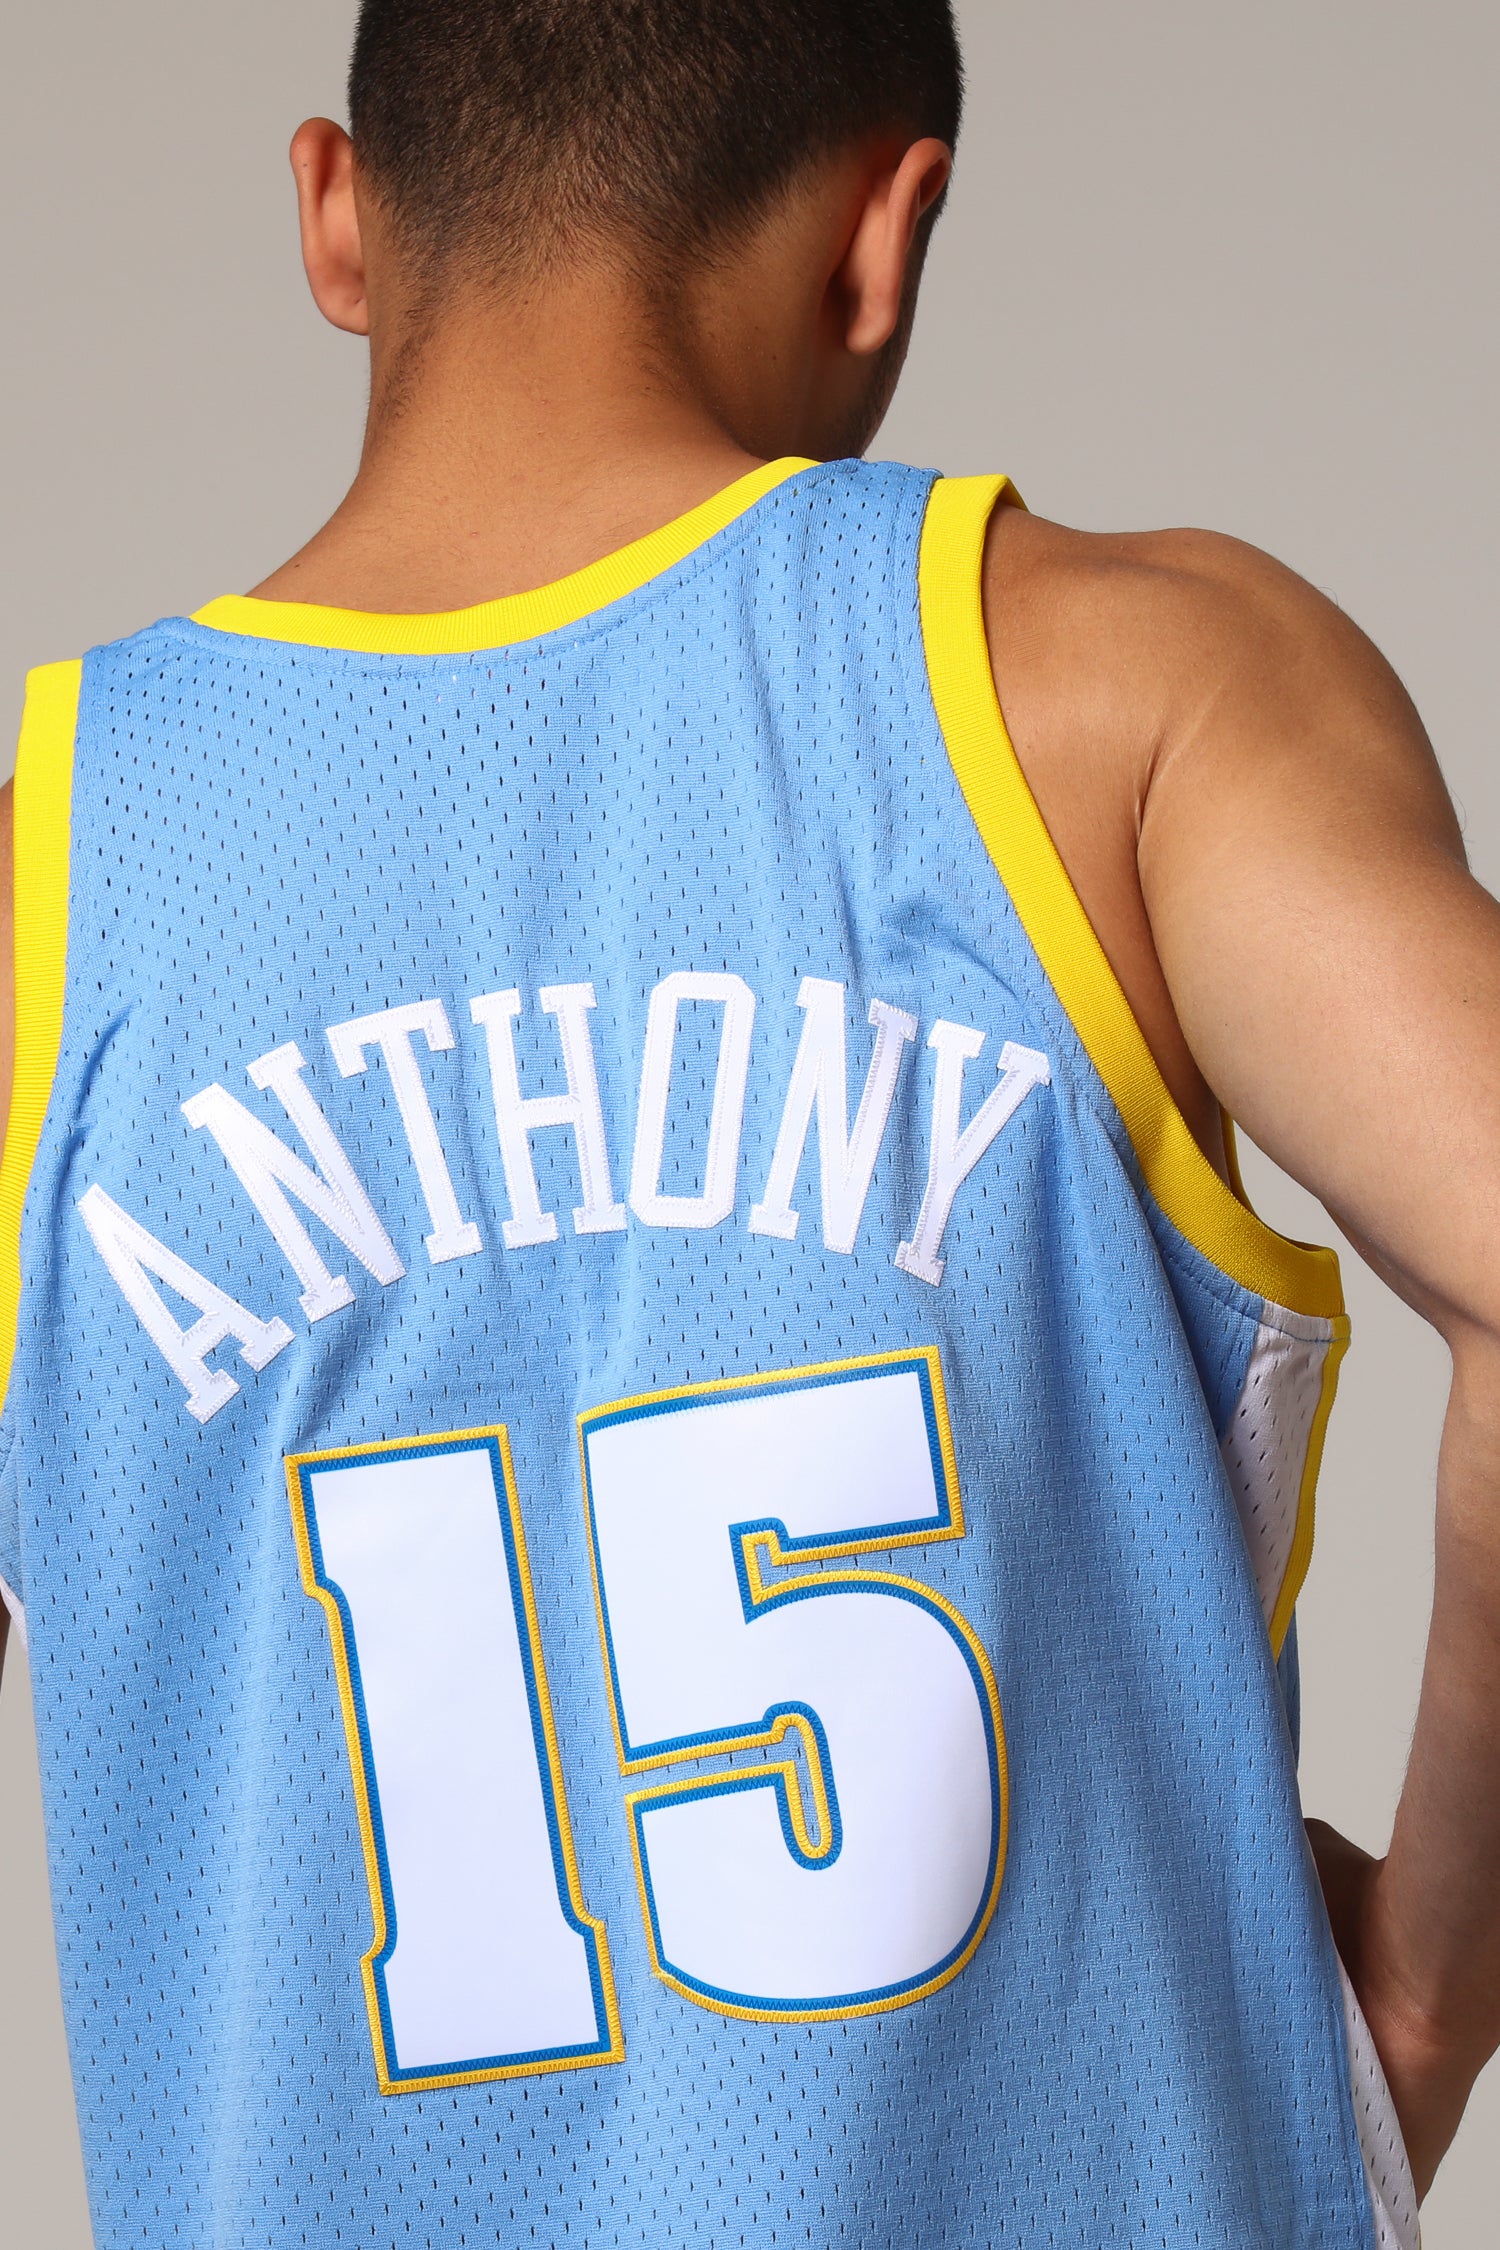 mitchell and ness carmelo anthony